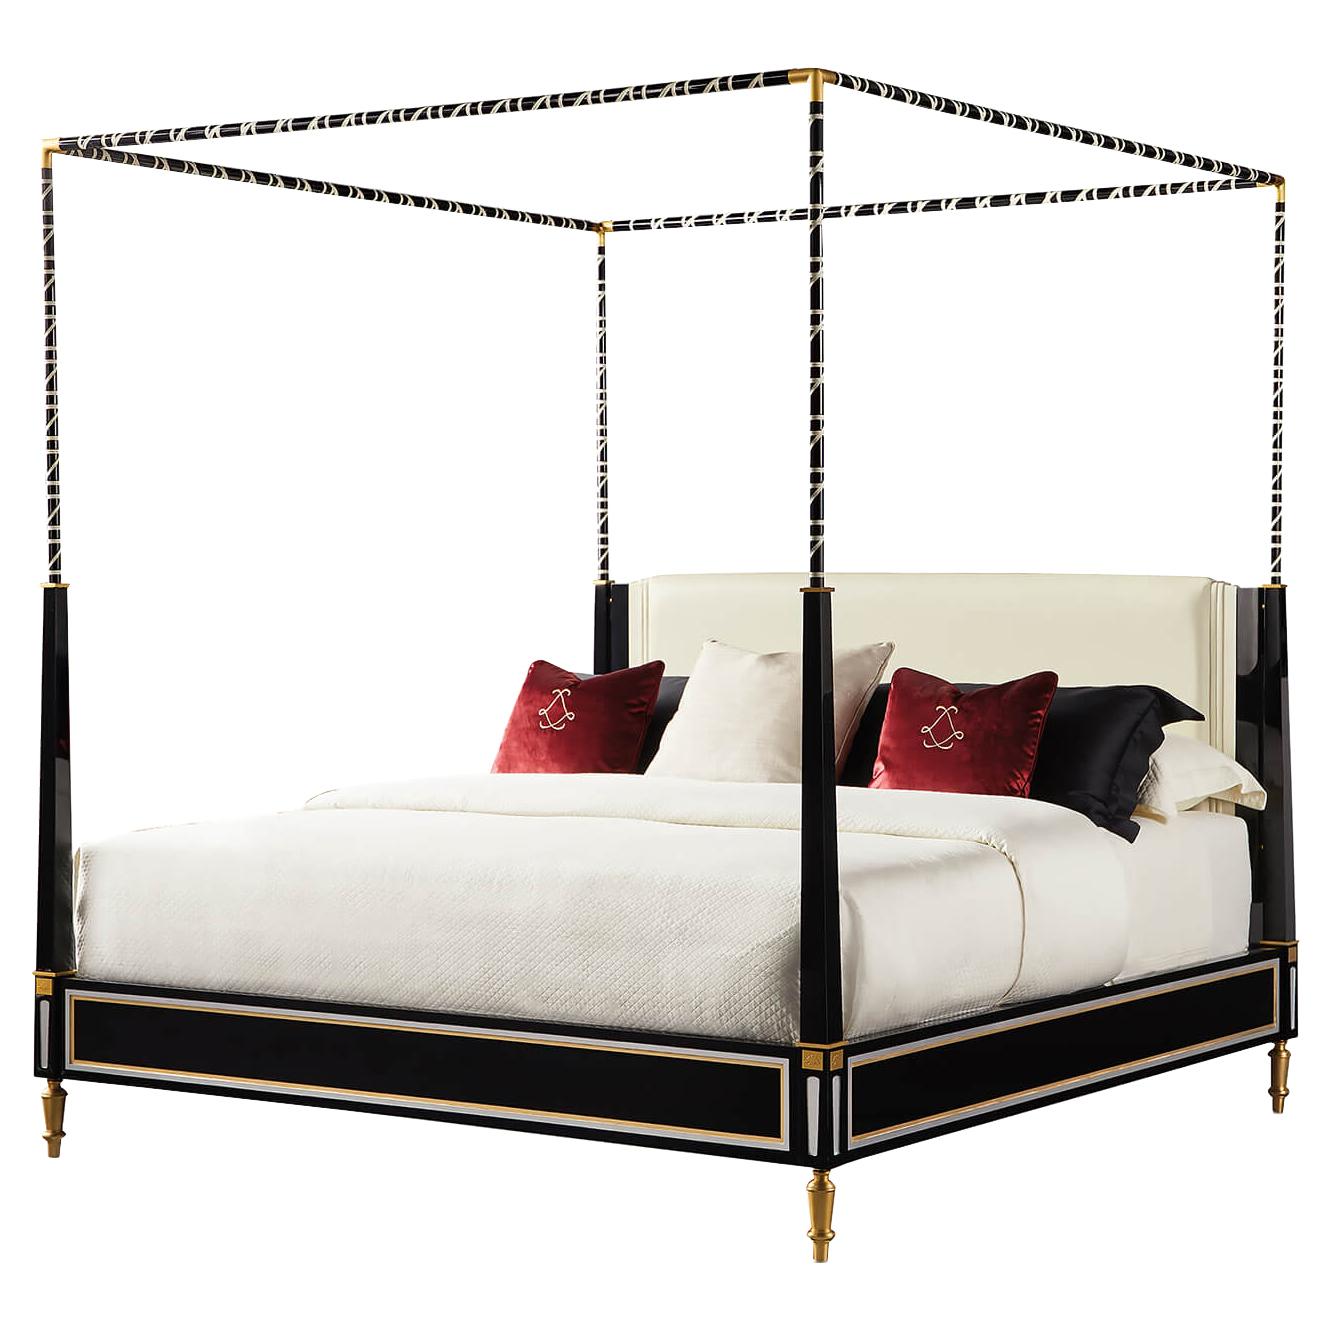 What Is A Canopy Over Bed Called, What Is A Canopy Over Bed Called